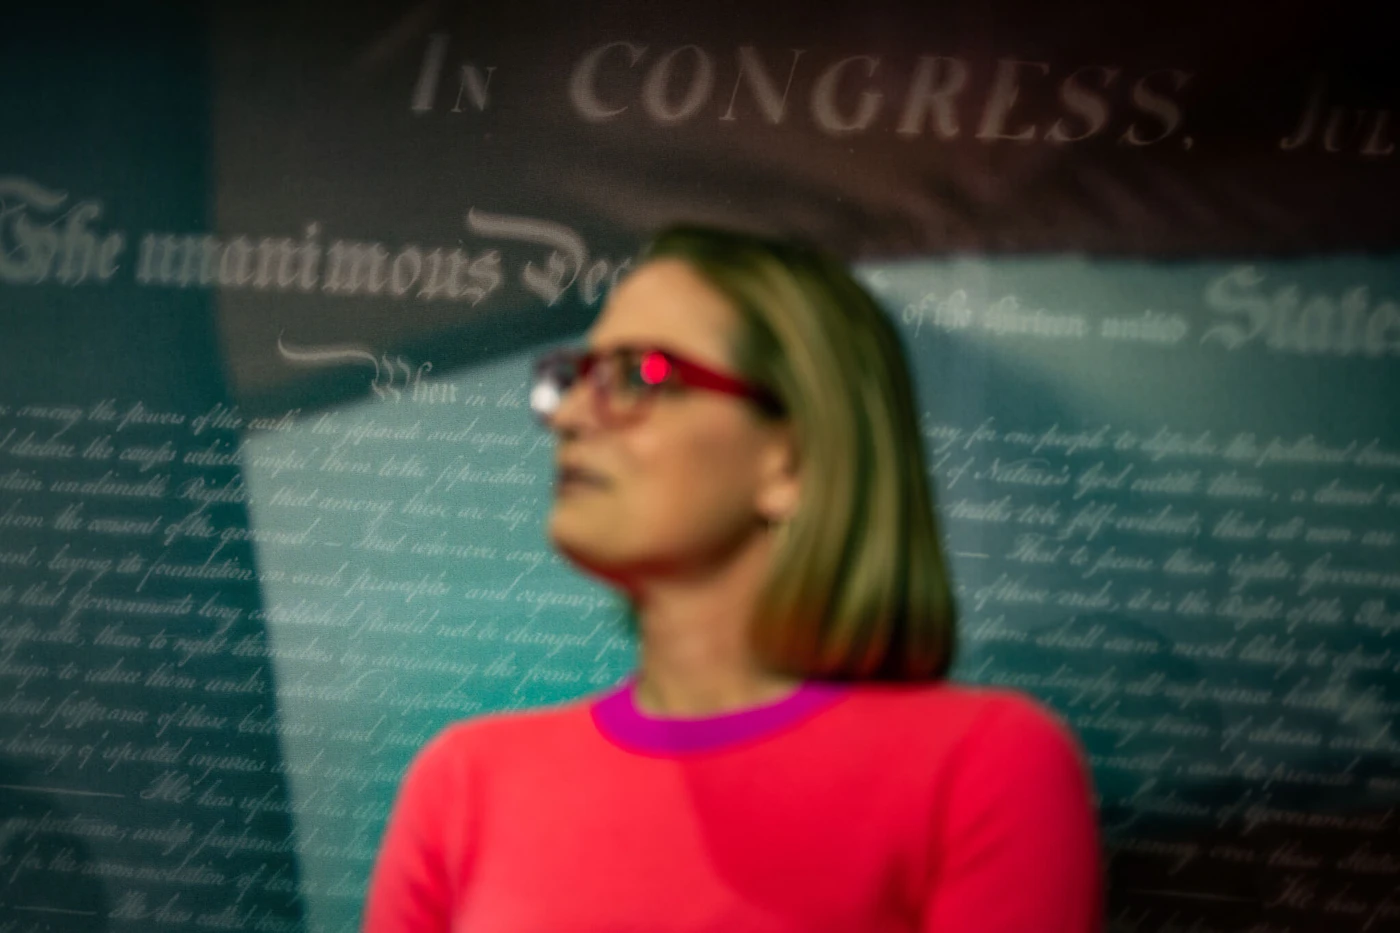 WASHINGTON, DC - NOVEMBER 29: Sen. Kyrsten Sinema (D-AZ) listens during a news conference in the U.S. Capitol Building following a vote to pass the Respect For Marriage Act on Capitol Hill on Tuesday, Nov. 29, 2022 in Washington, DC. (Kent Nishimura / Los Angeles Times via Getty Images)